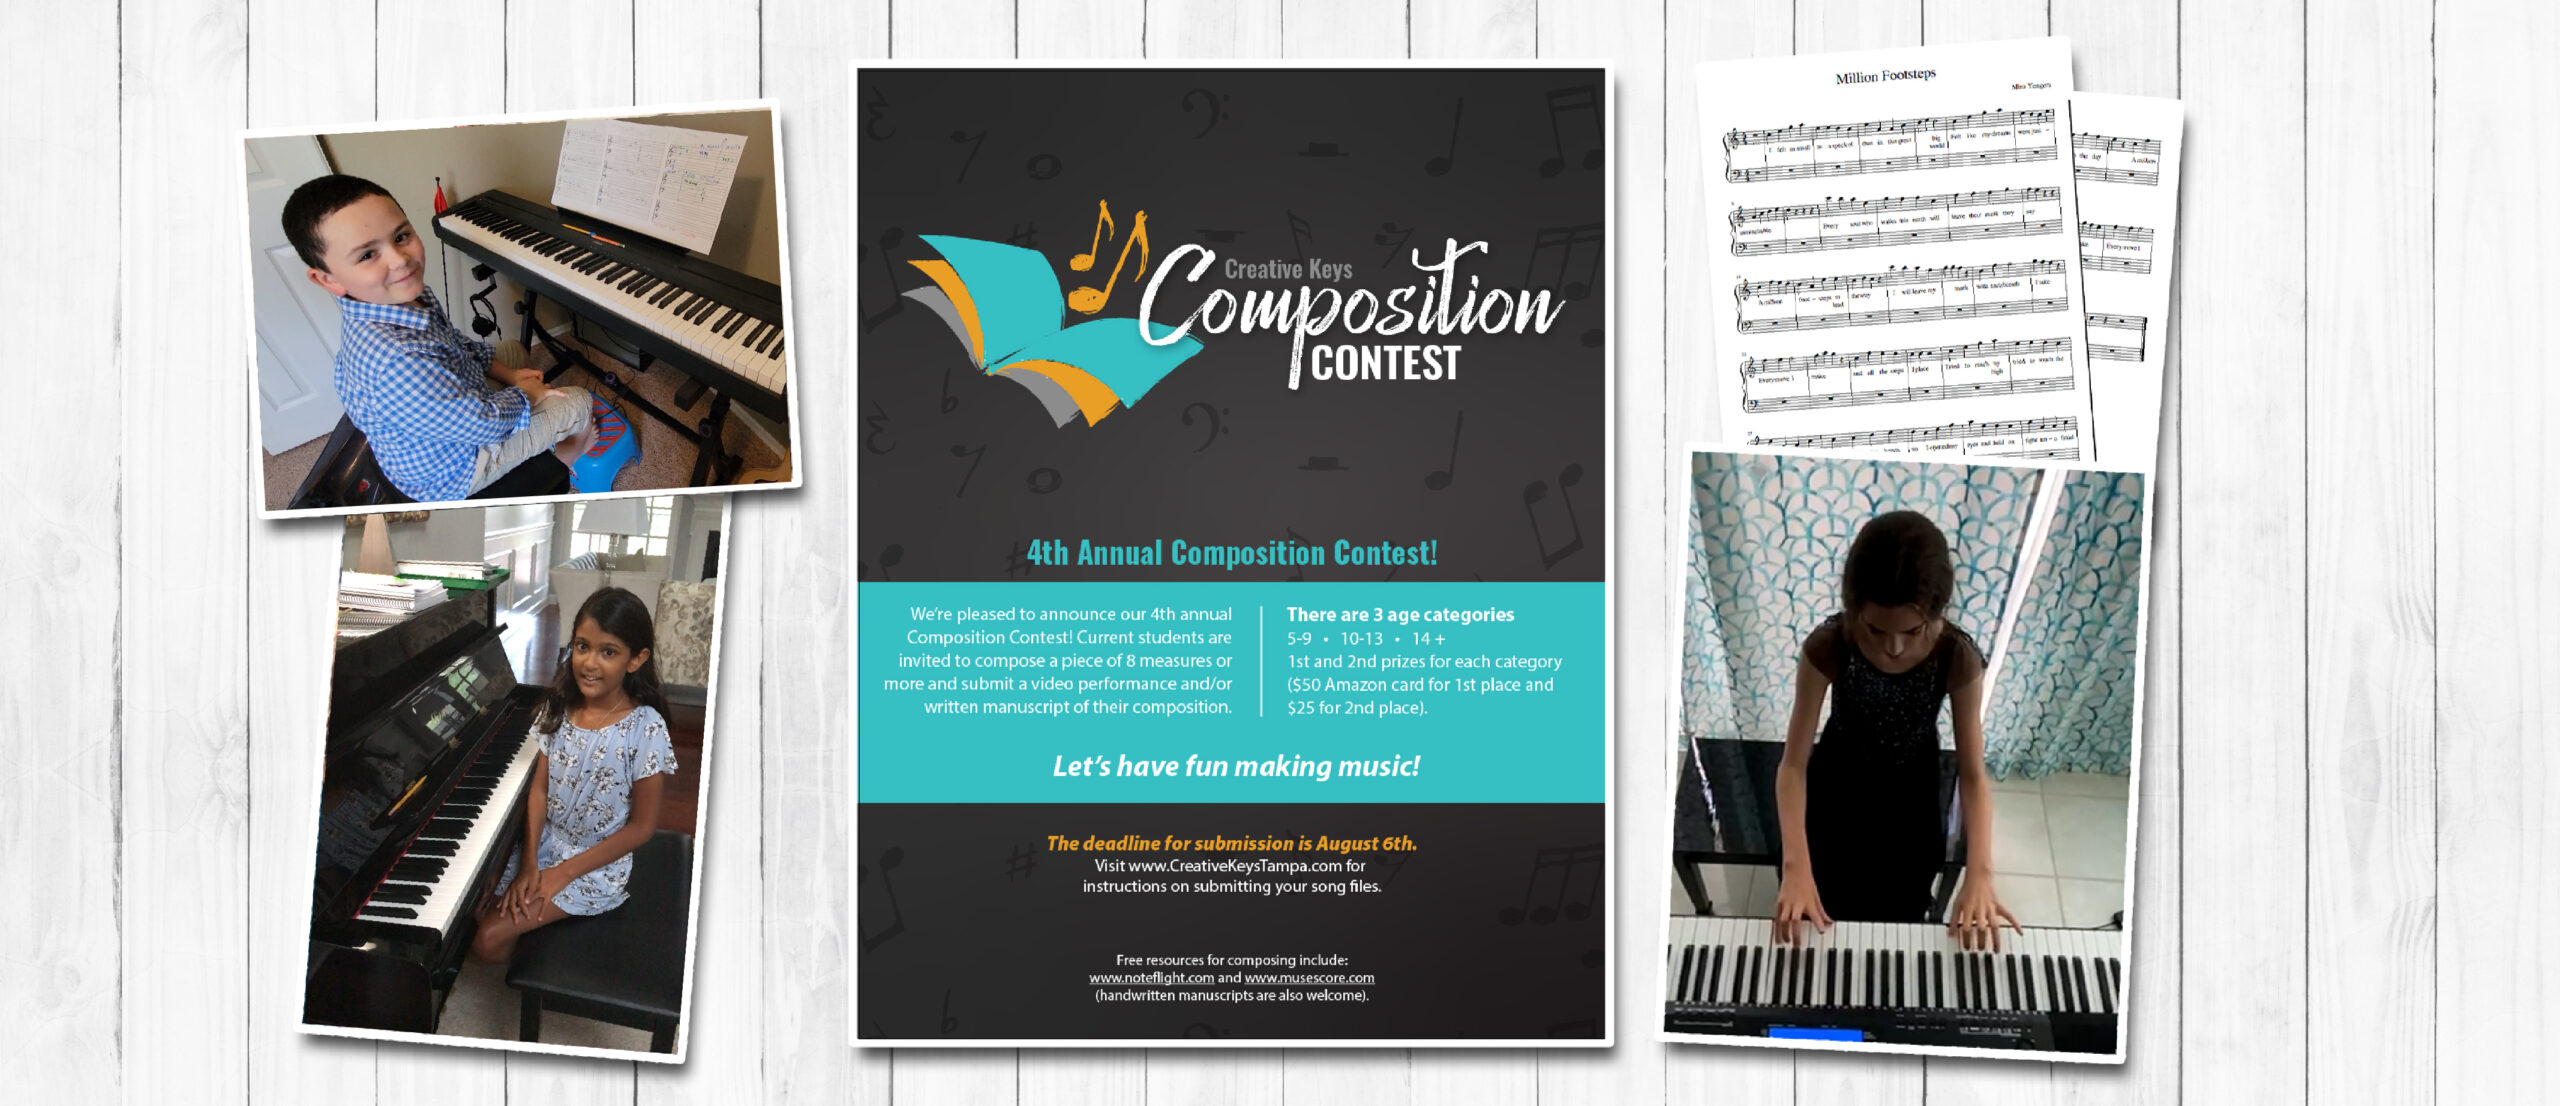 Summer Music Fun with Composition Contest